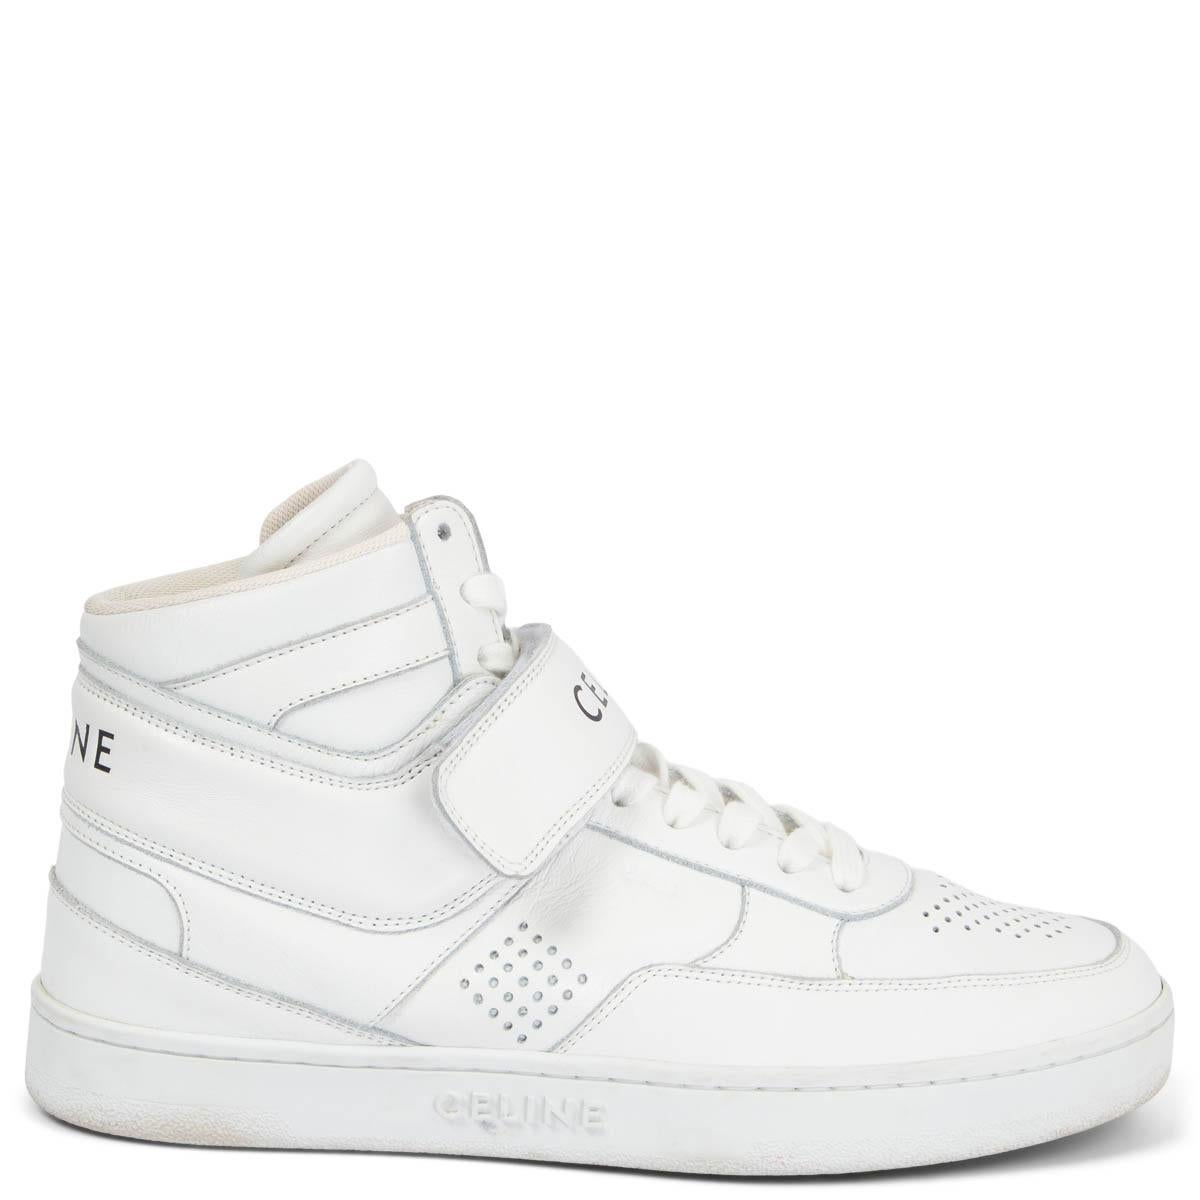 CELINE white leather CT-03 High Top Sneakers Shoes 39